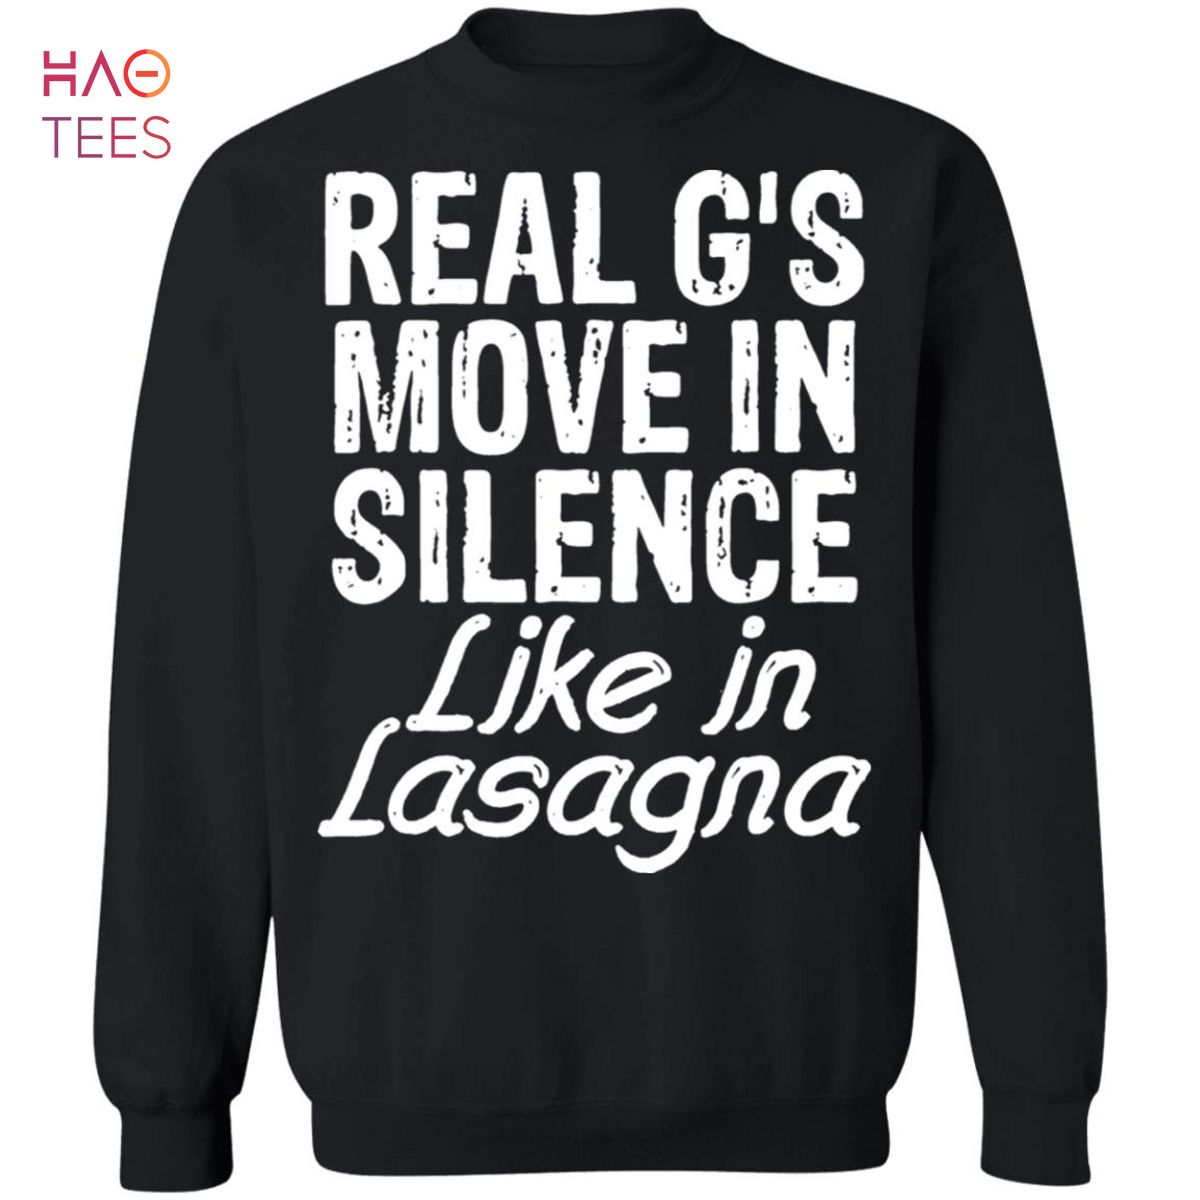 BEST Real Gs Move In Silence Like Lasagna Sweater